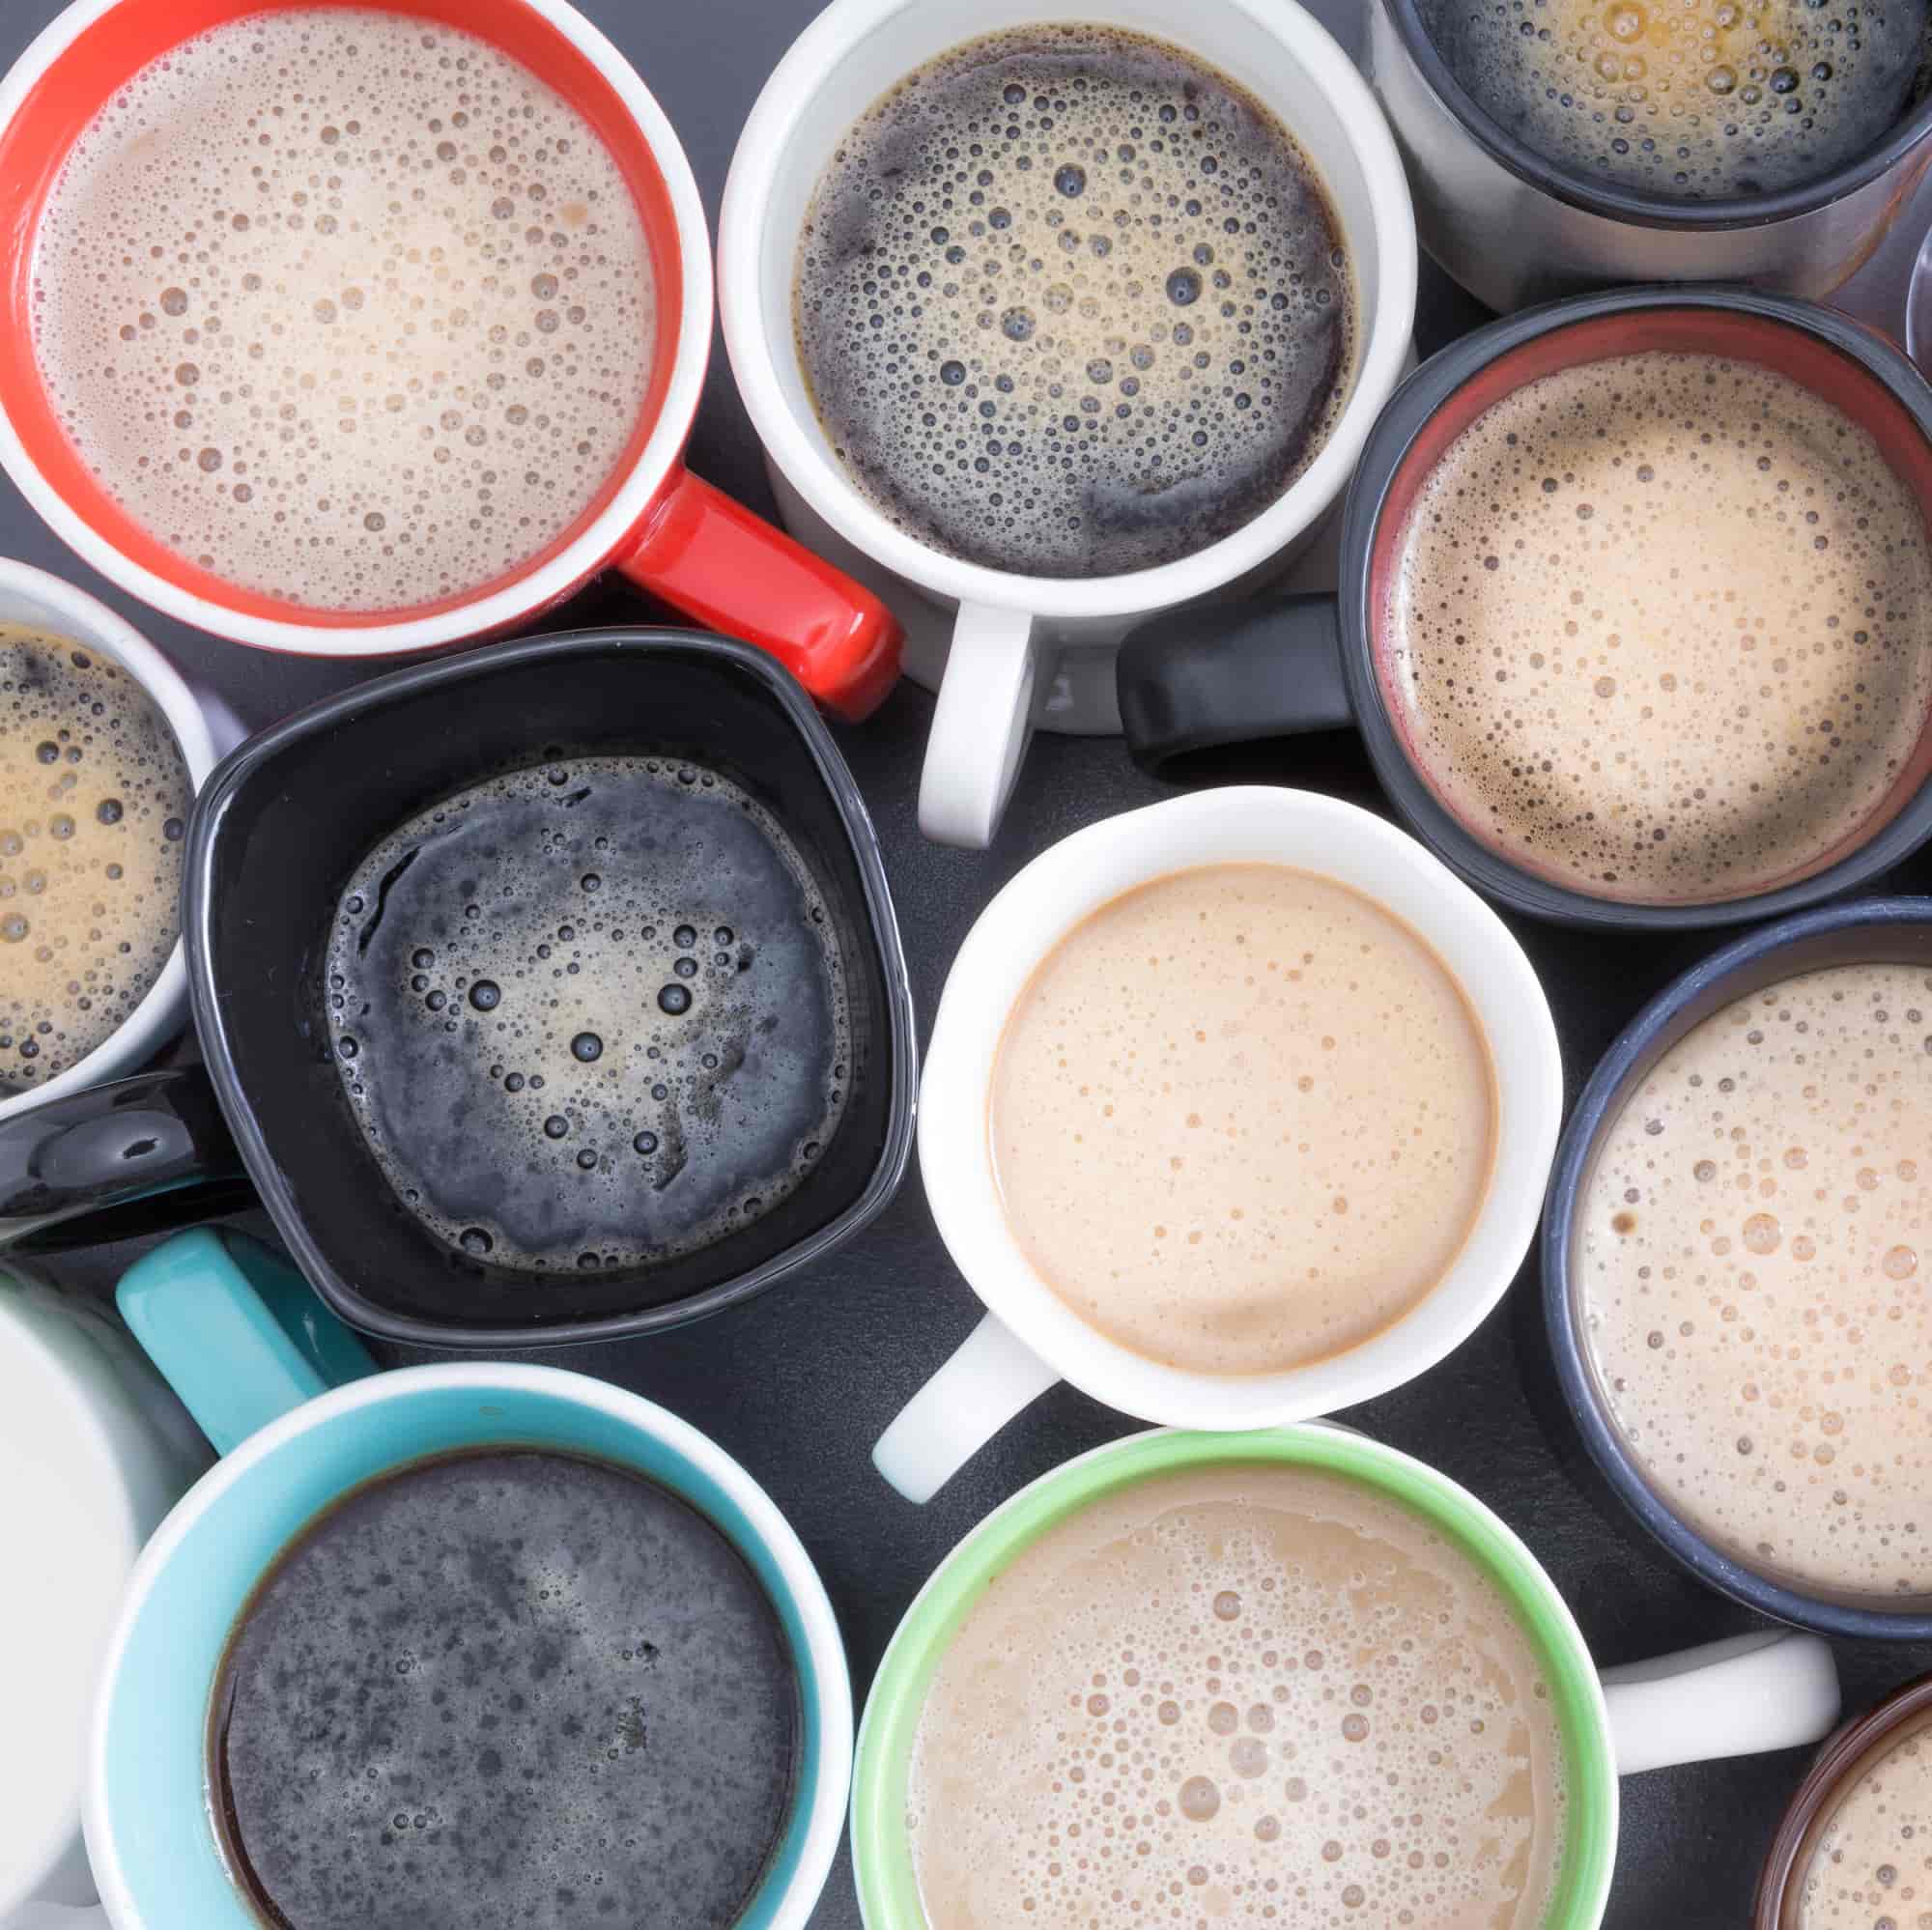 Is Coffee Black or Brown? The Many Colors of Coffee